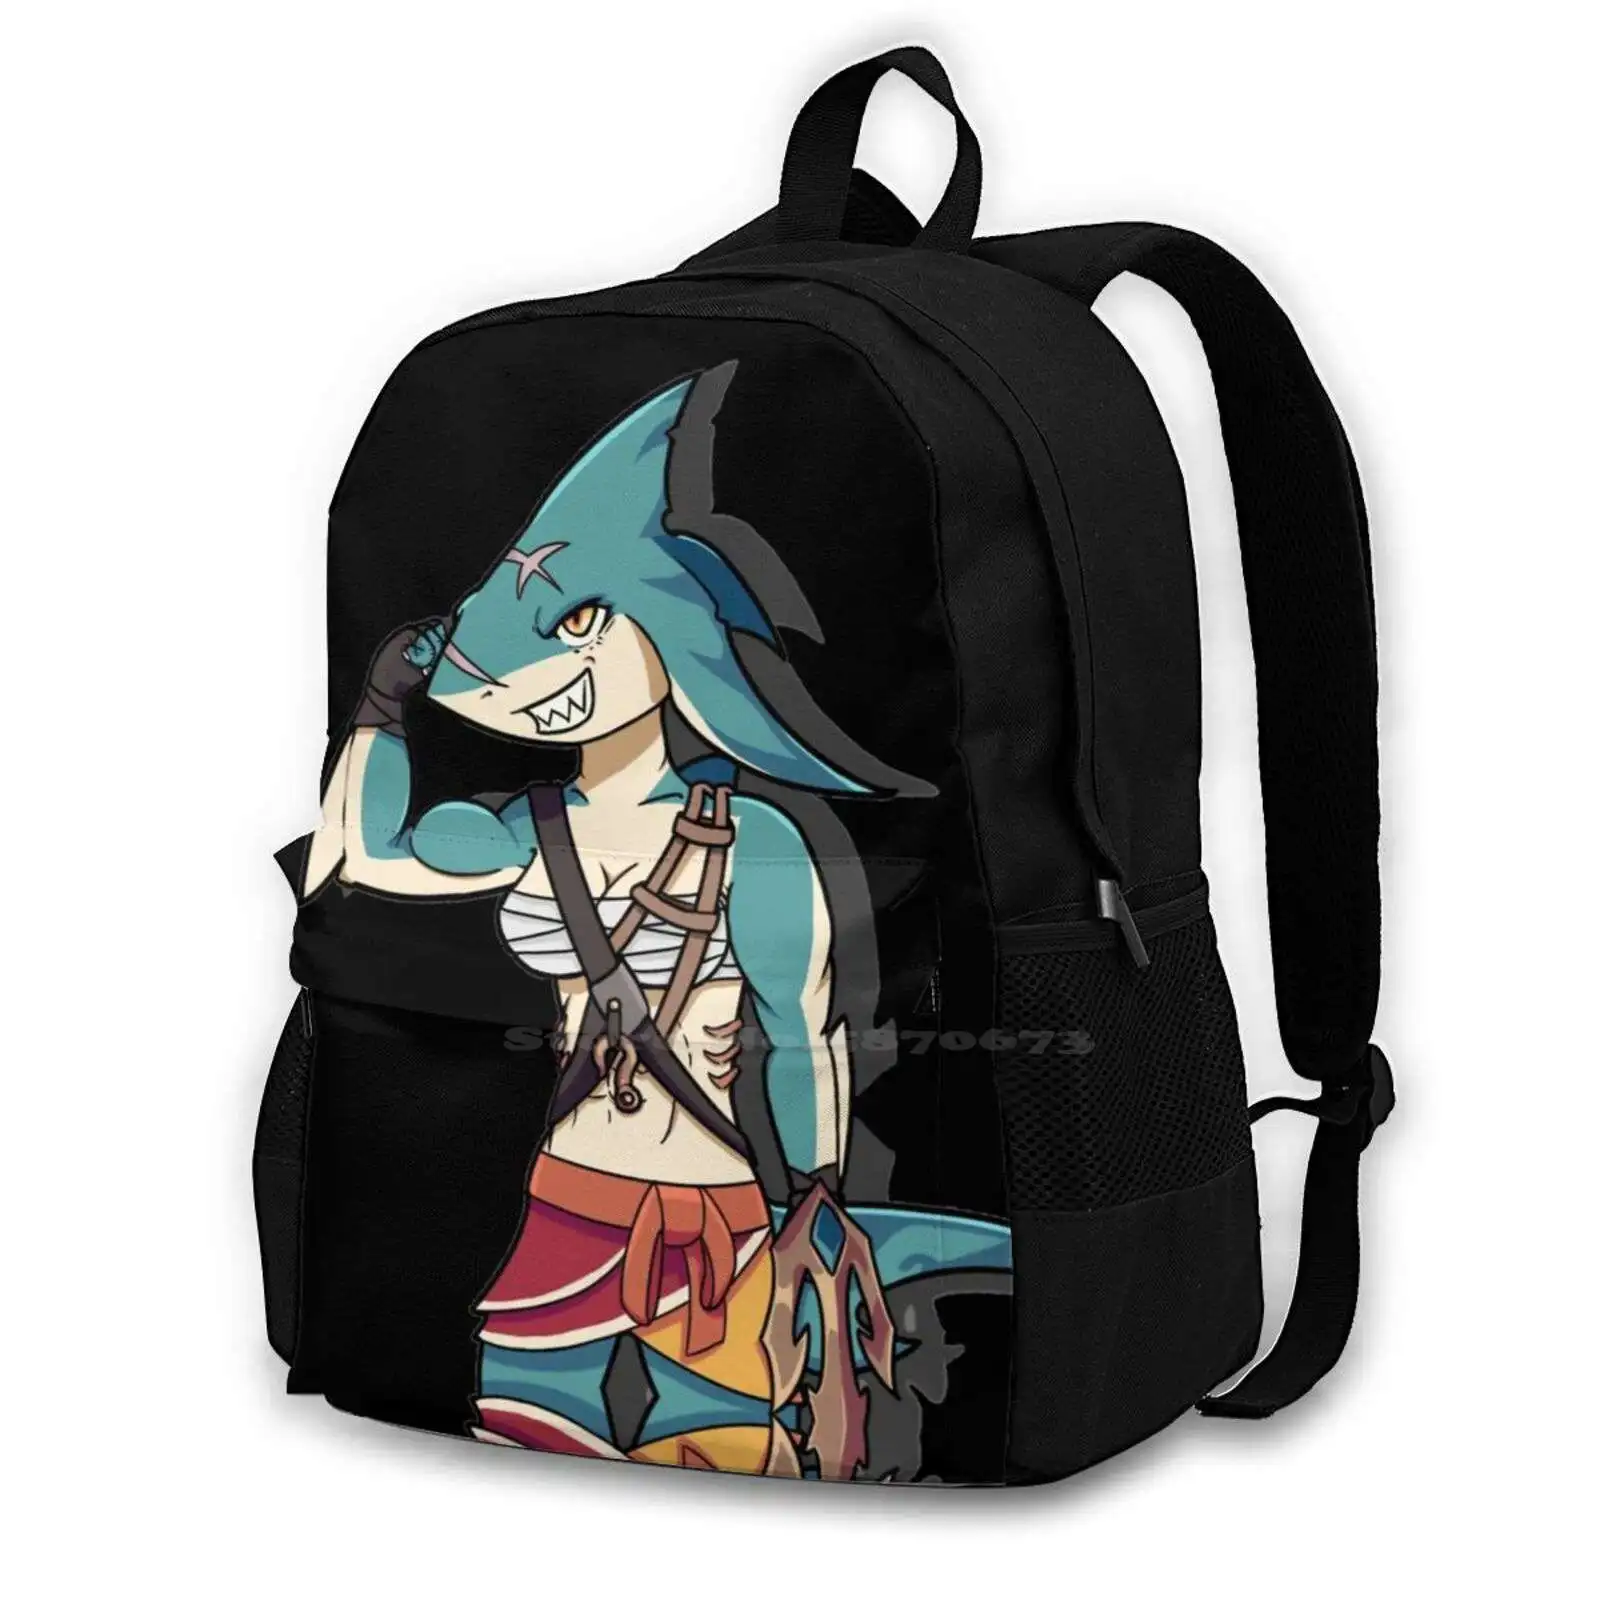 

Brawlhalla Fan Art Fashion Bags Backpacks Brawlhalla Combo Kill Warrior Death Weapons Ps Fightinggame Hotboxes Bluemammoth